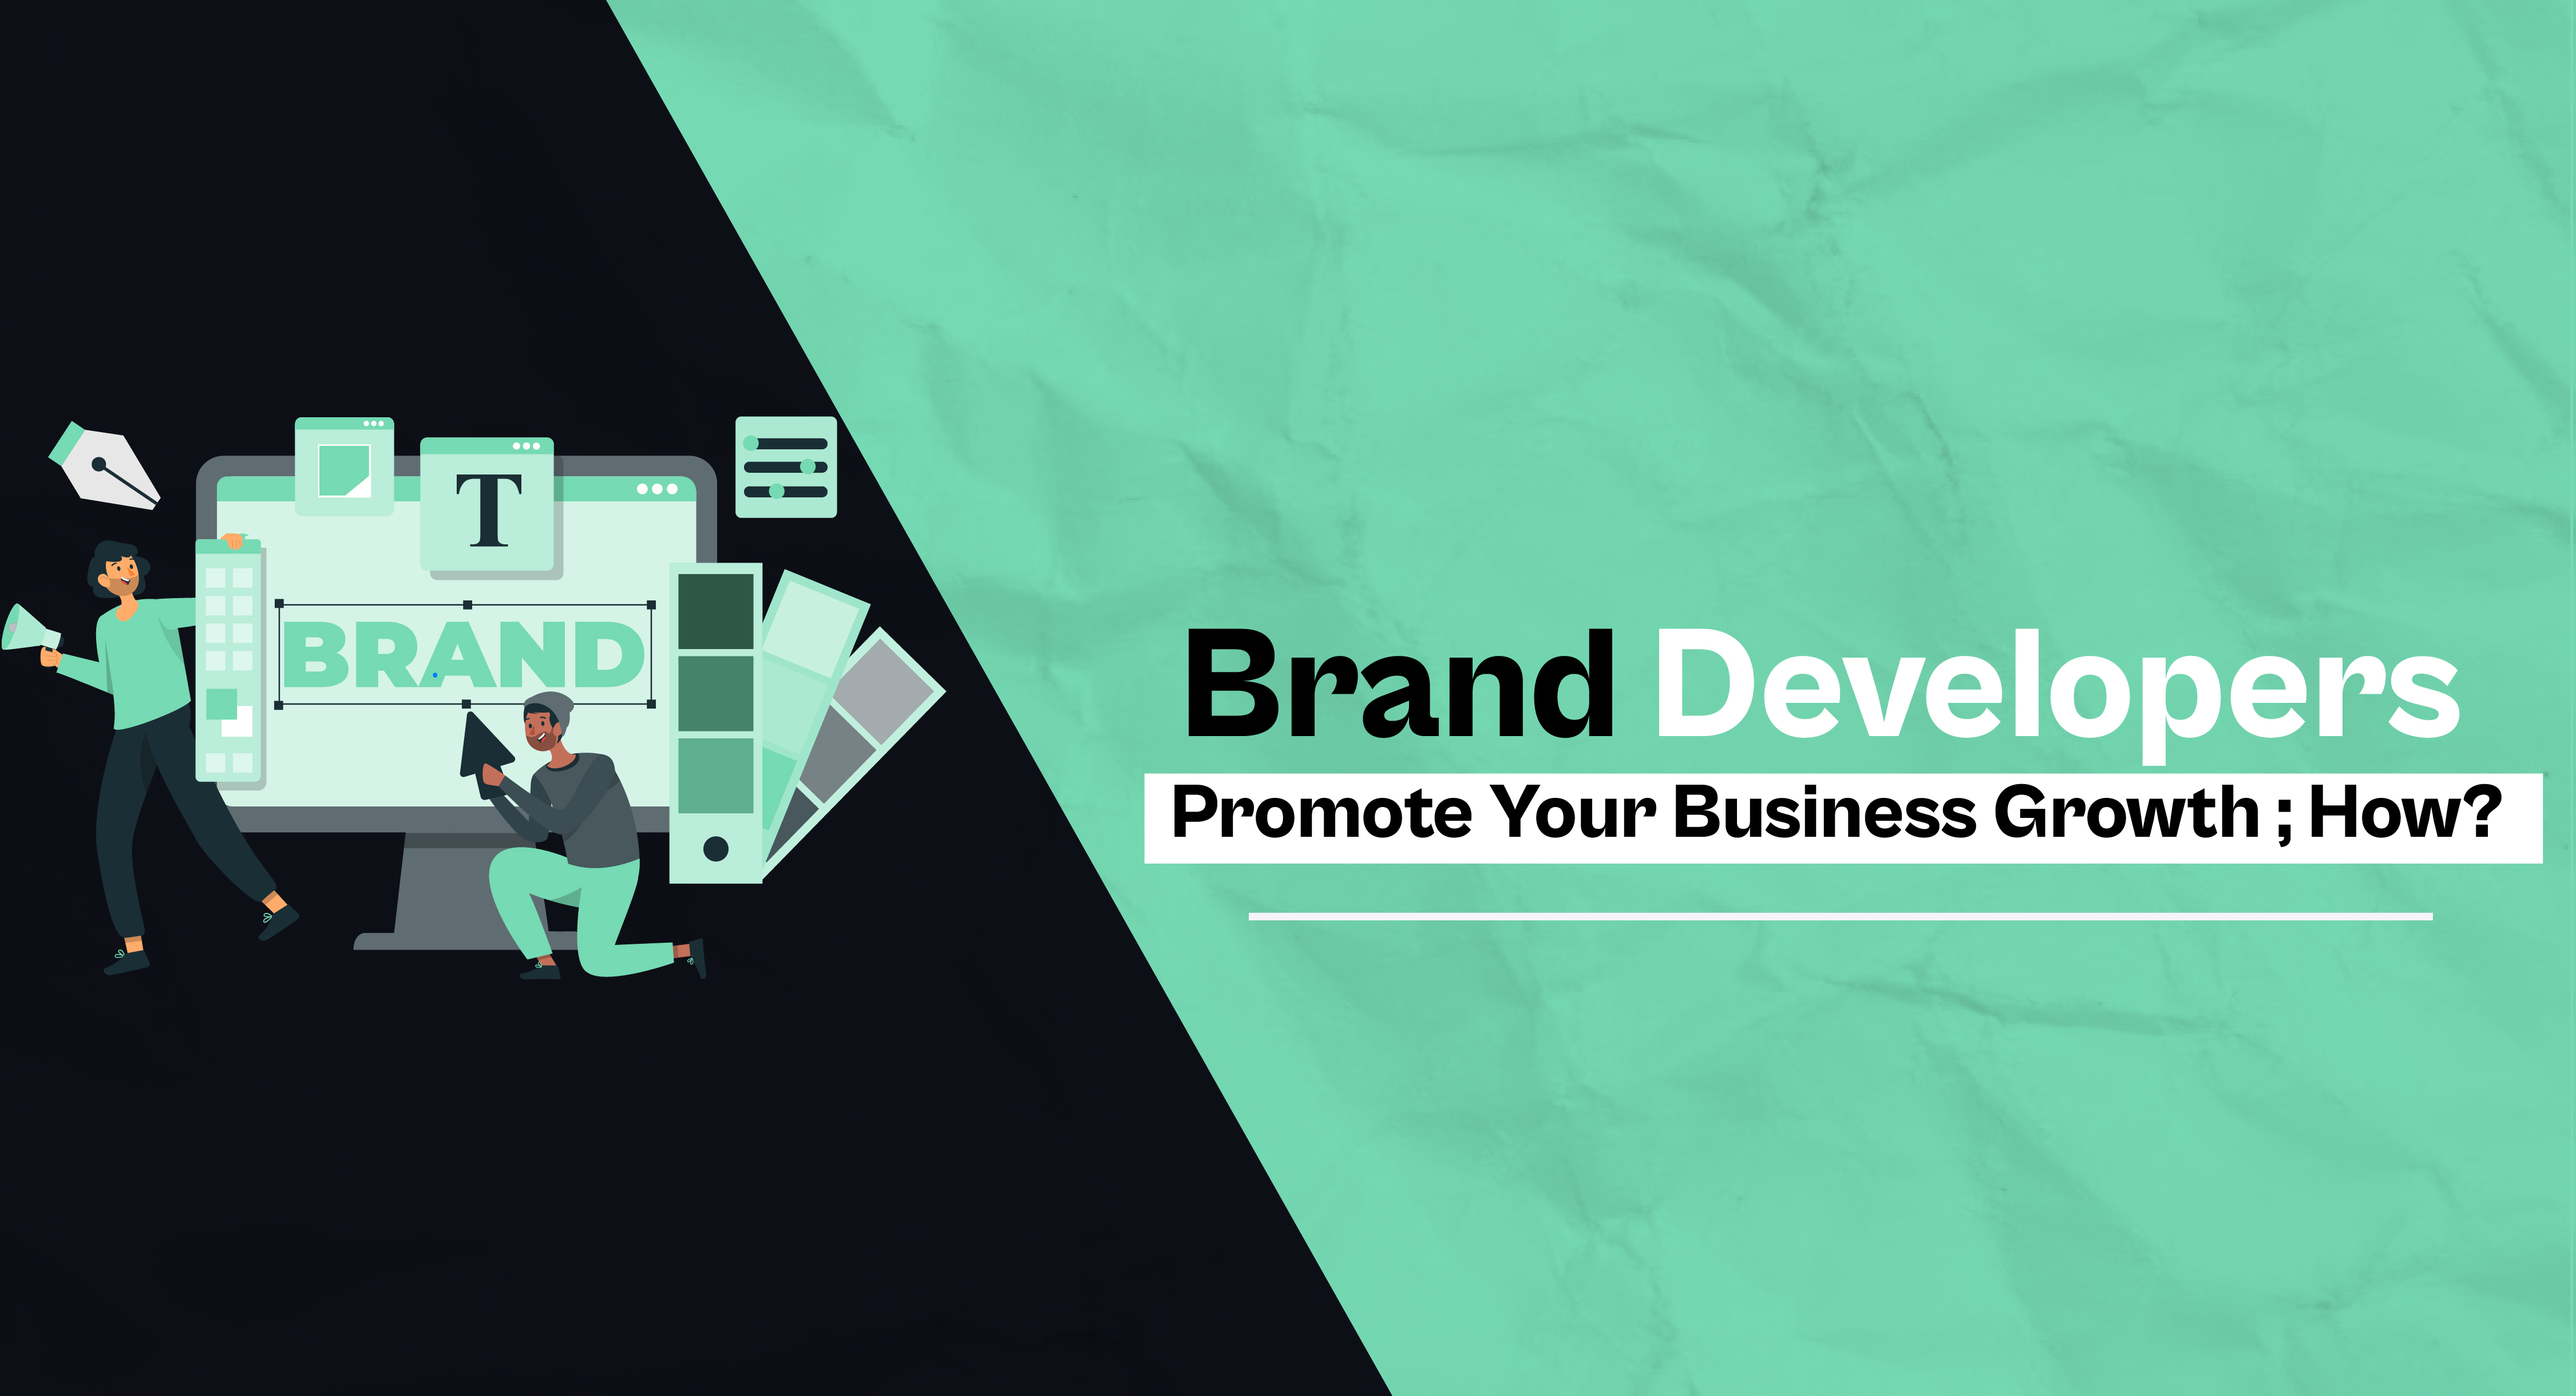 Brand Developers Promote Your Business Growth ; How?